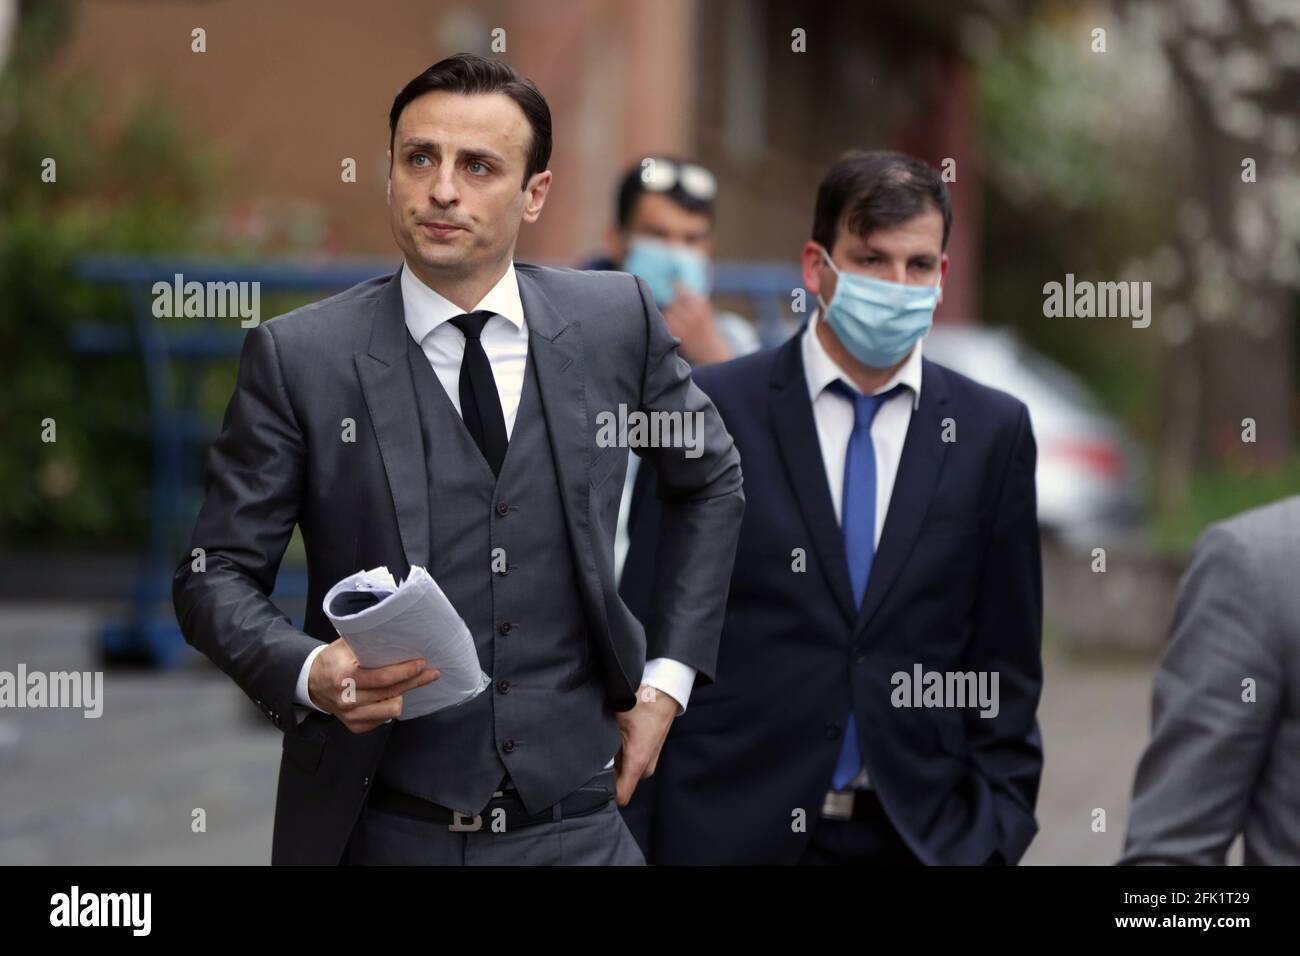 Sofia, Bulgaria: 27 April, 2021: Bulgarian former professional footballer Dimitar Berbatov (L) leaves a press conference at which he announced that he would run for president of the Bulgarian Football Union. Stock Photo